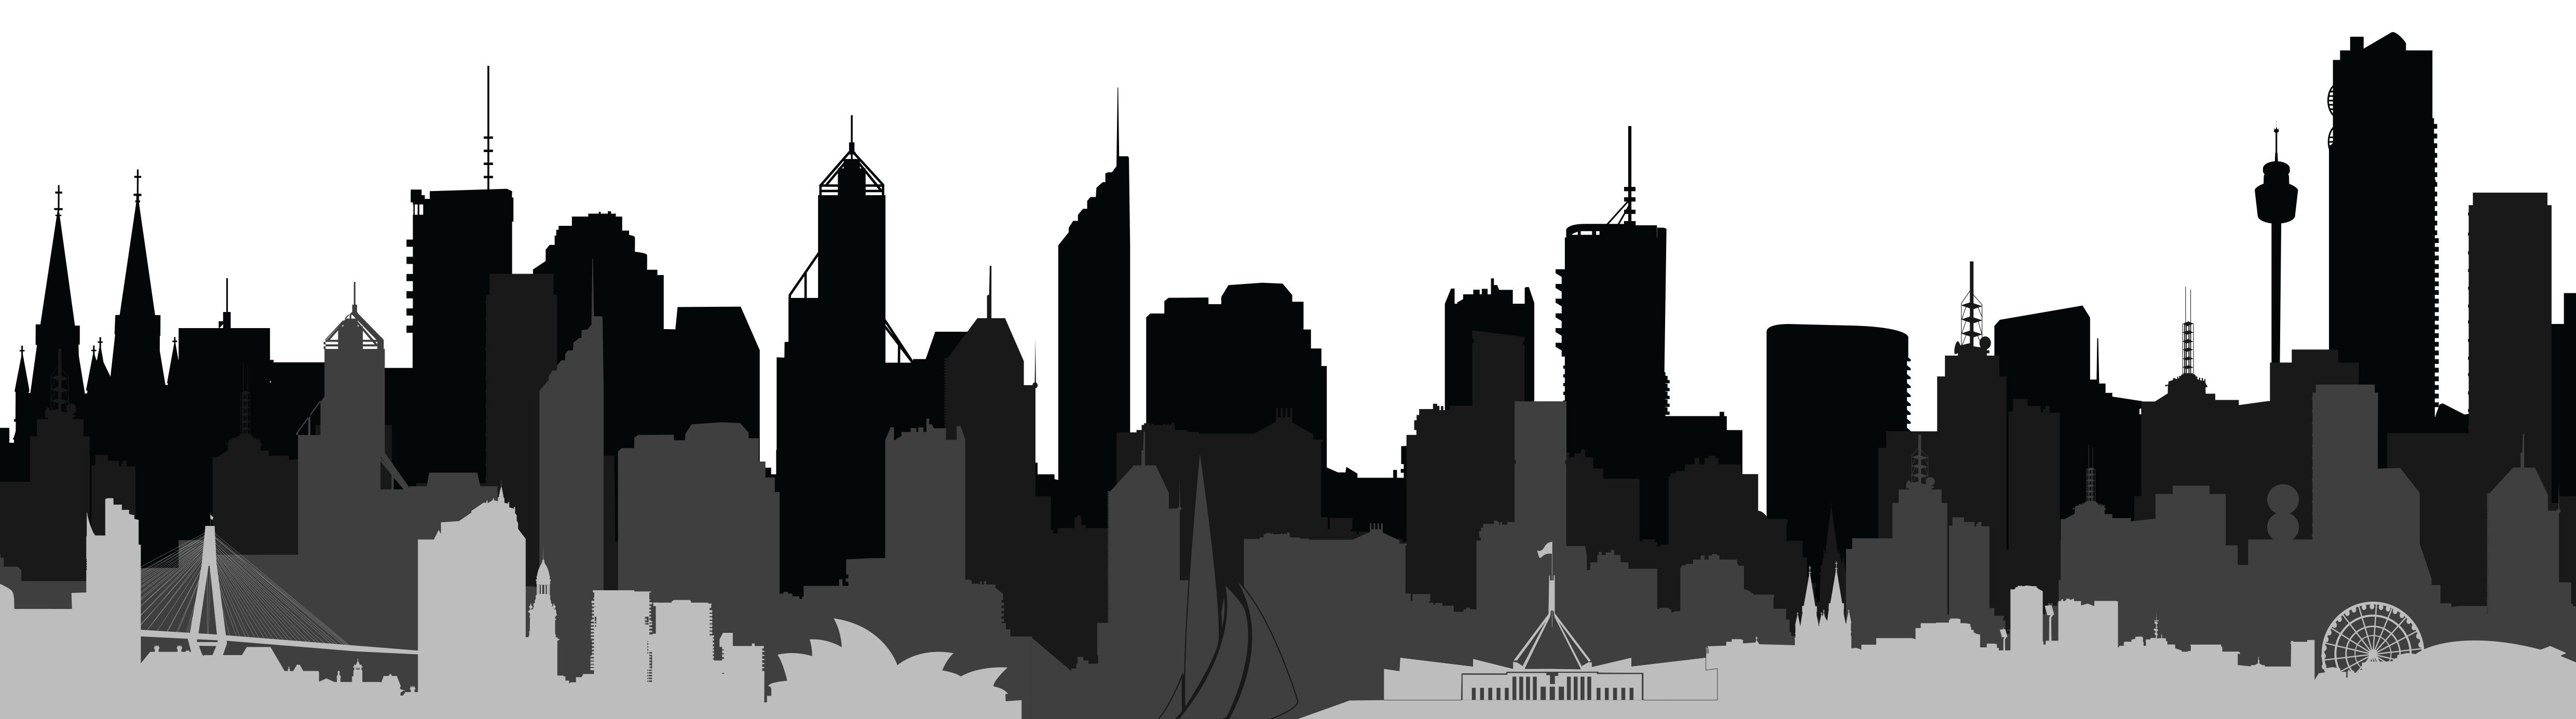 Black And White City PNG - 140396